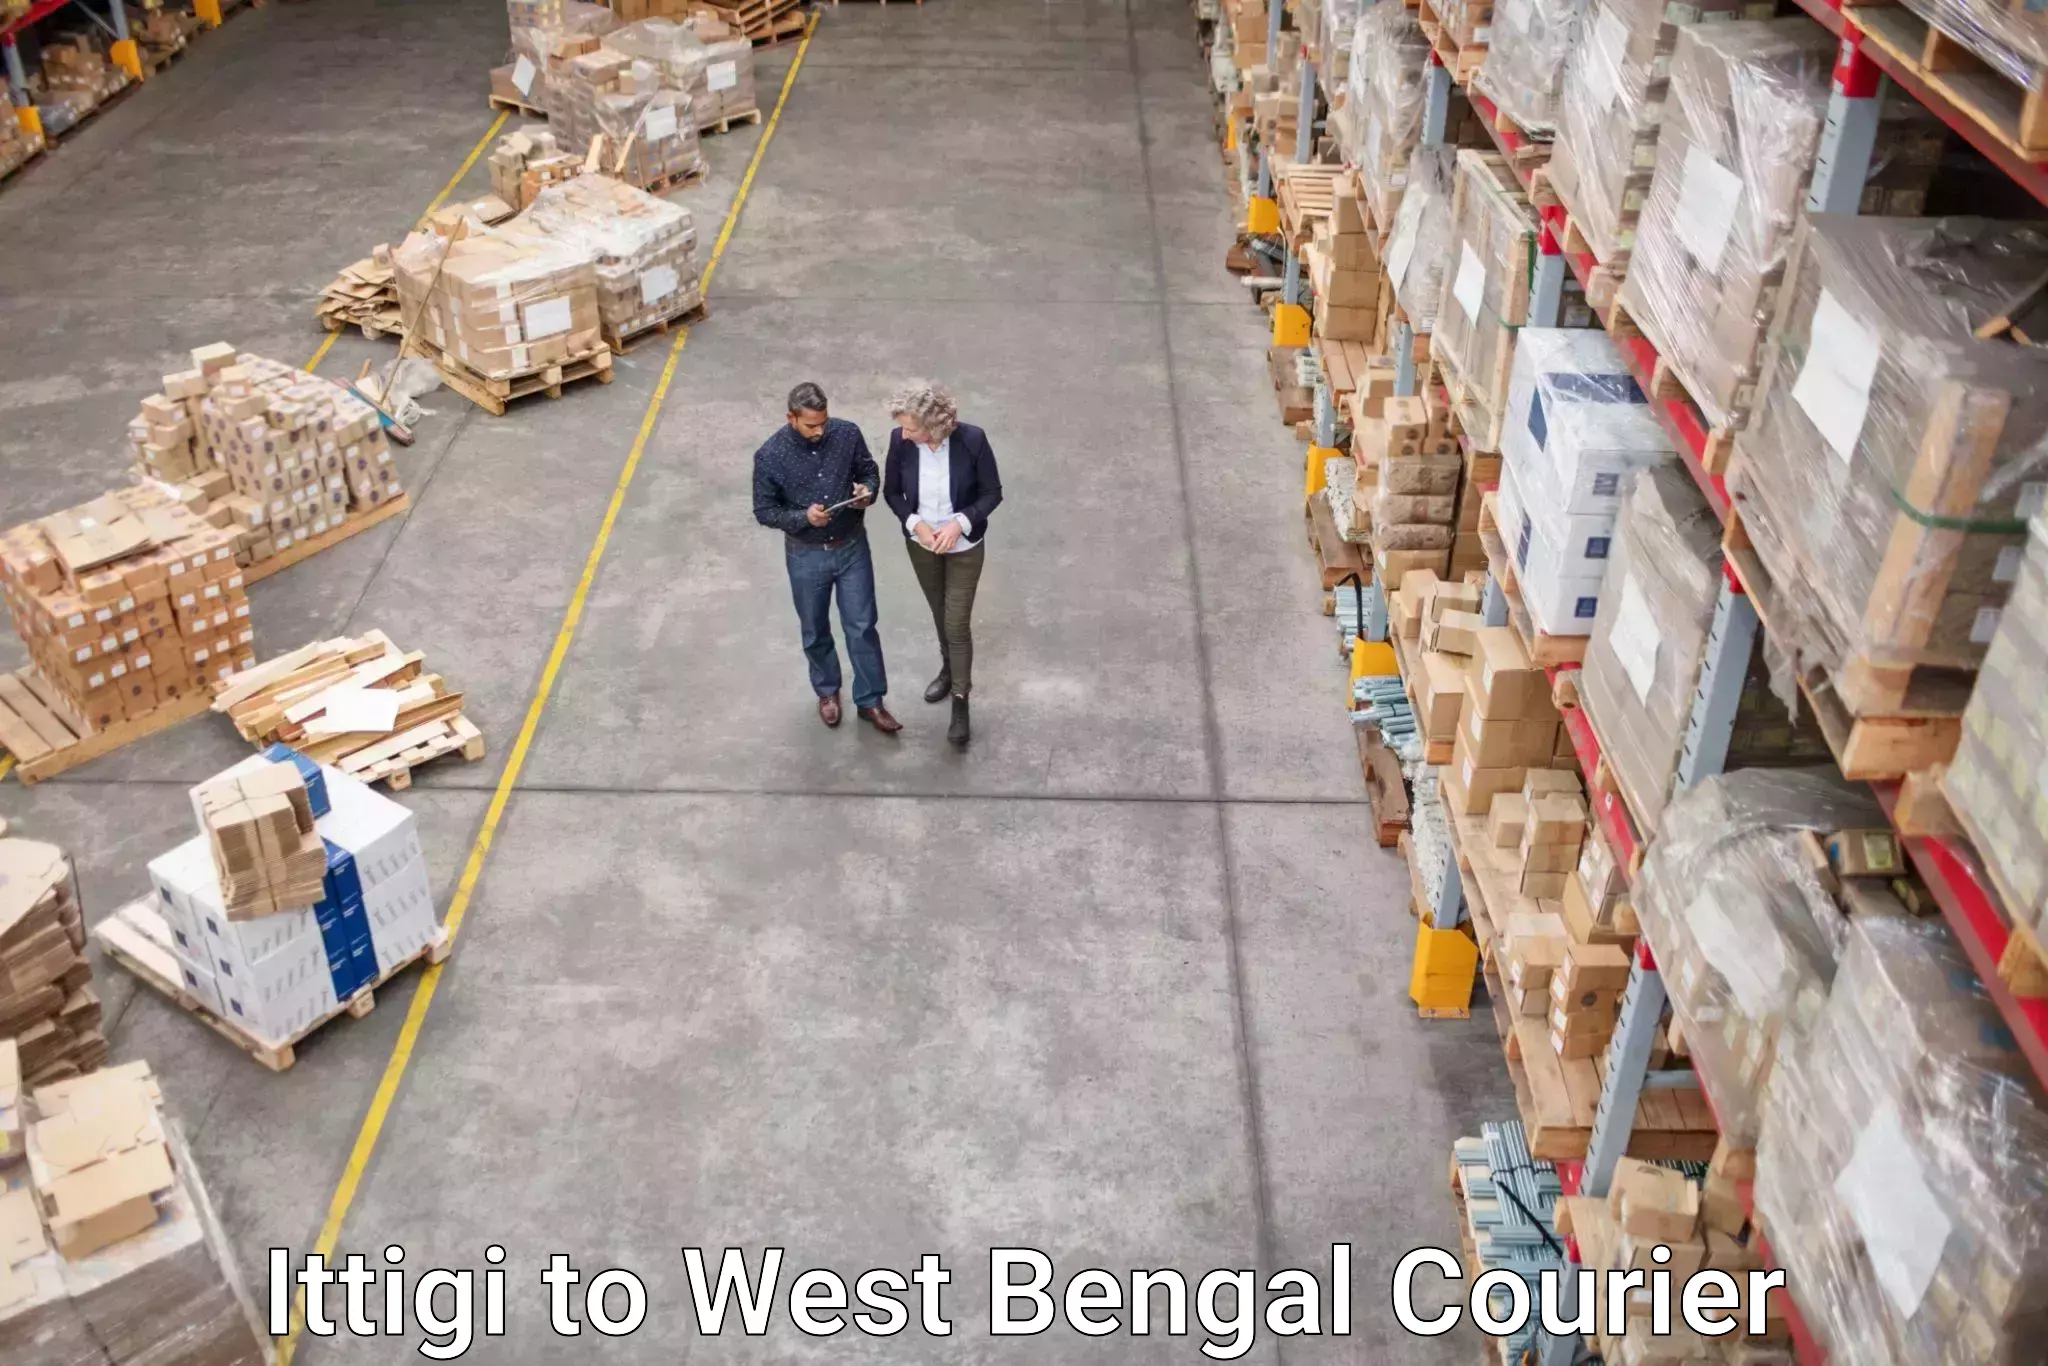 Next-day delivery options Ittigi to West Bengal